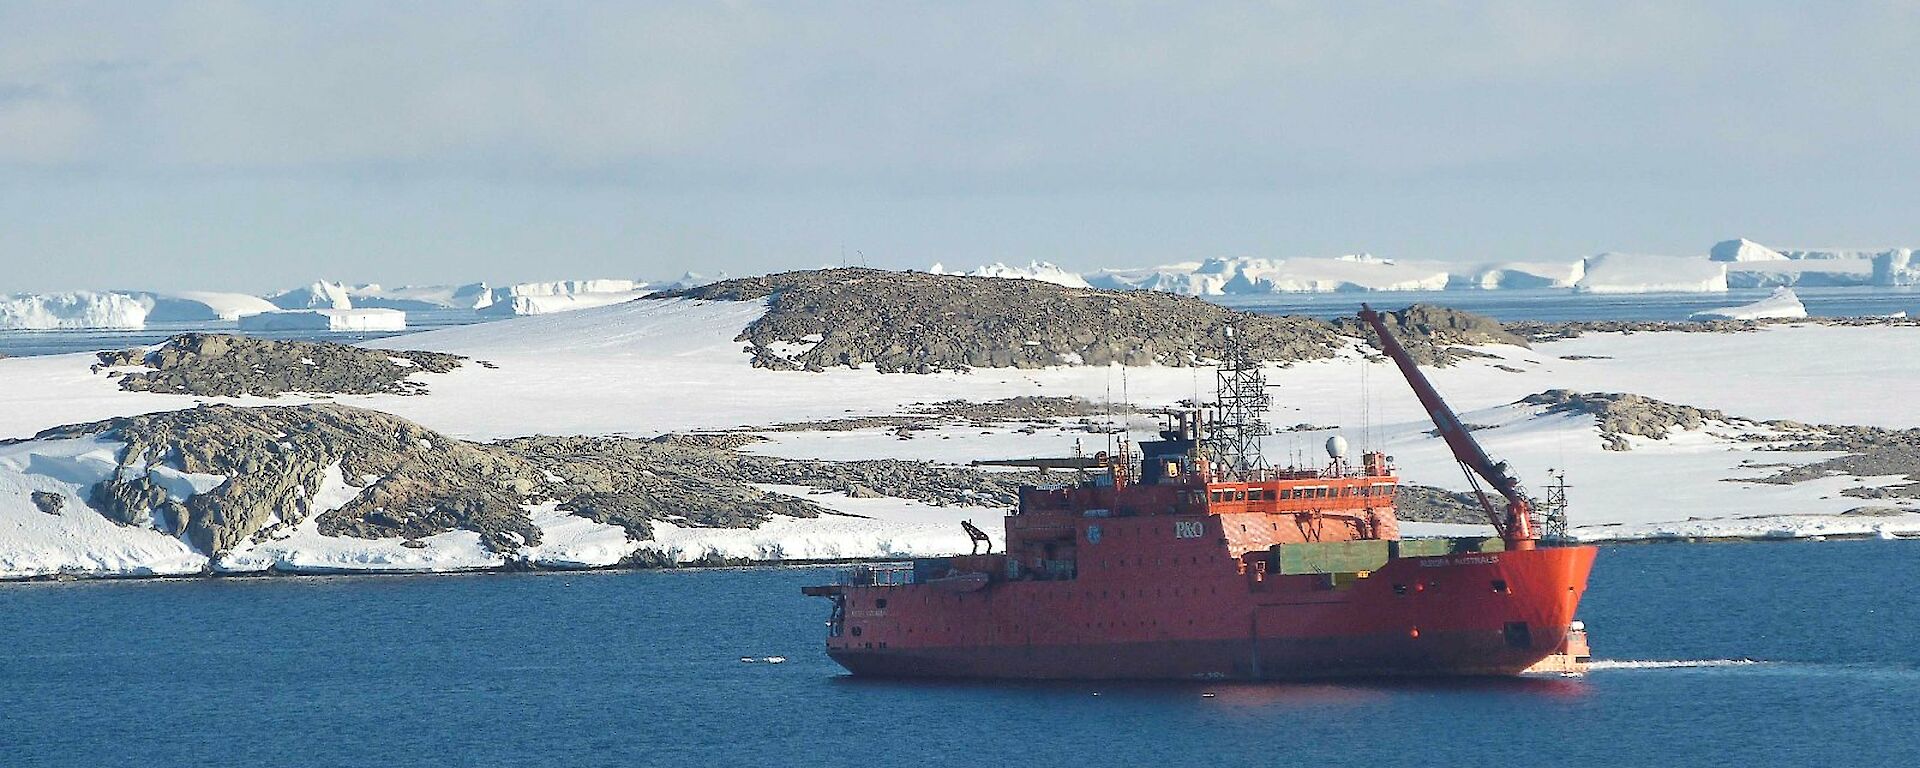 The Aurora Australis on anchor in the bay in front of the station